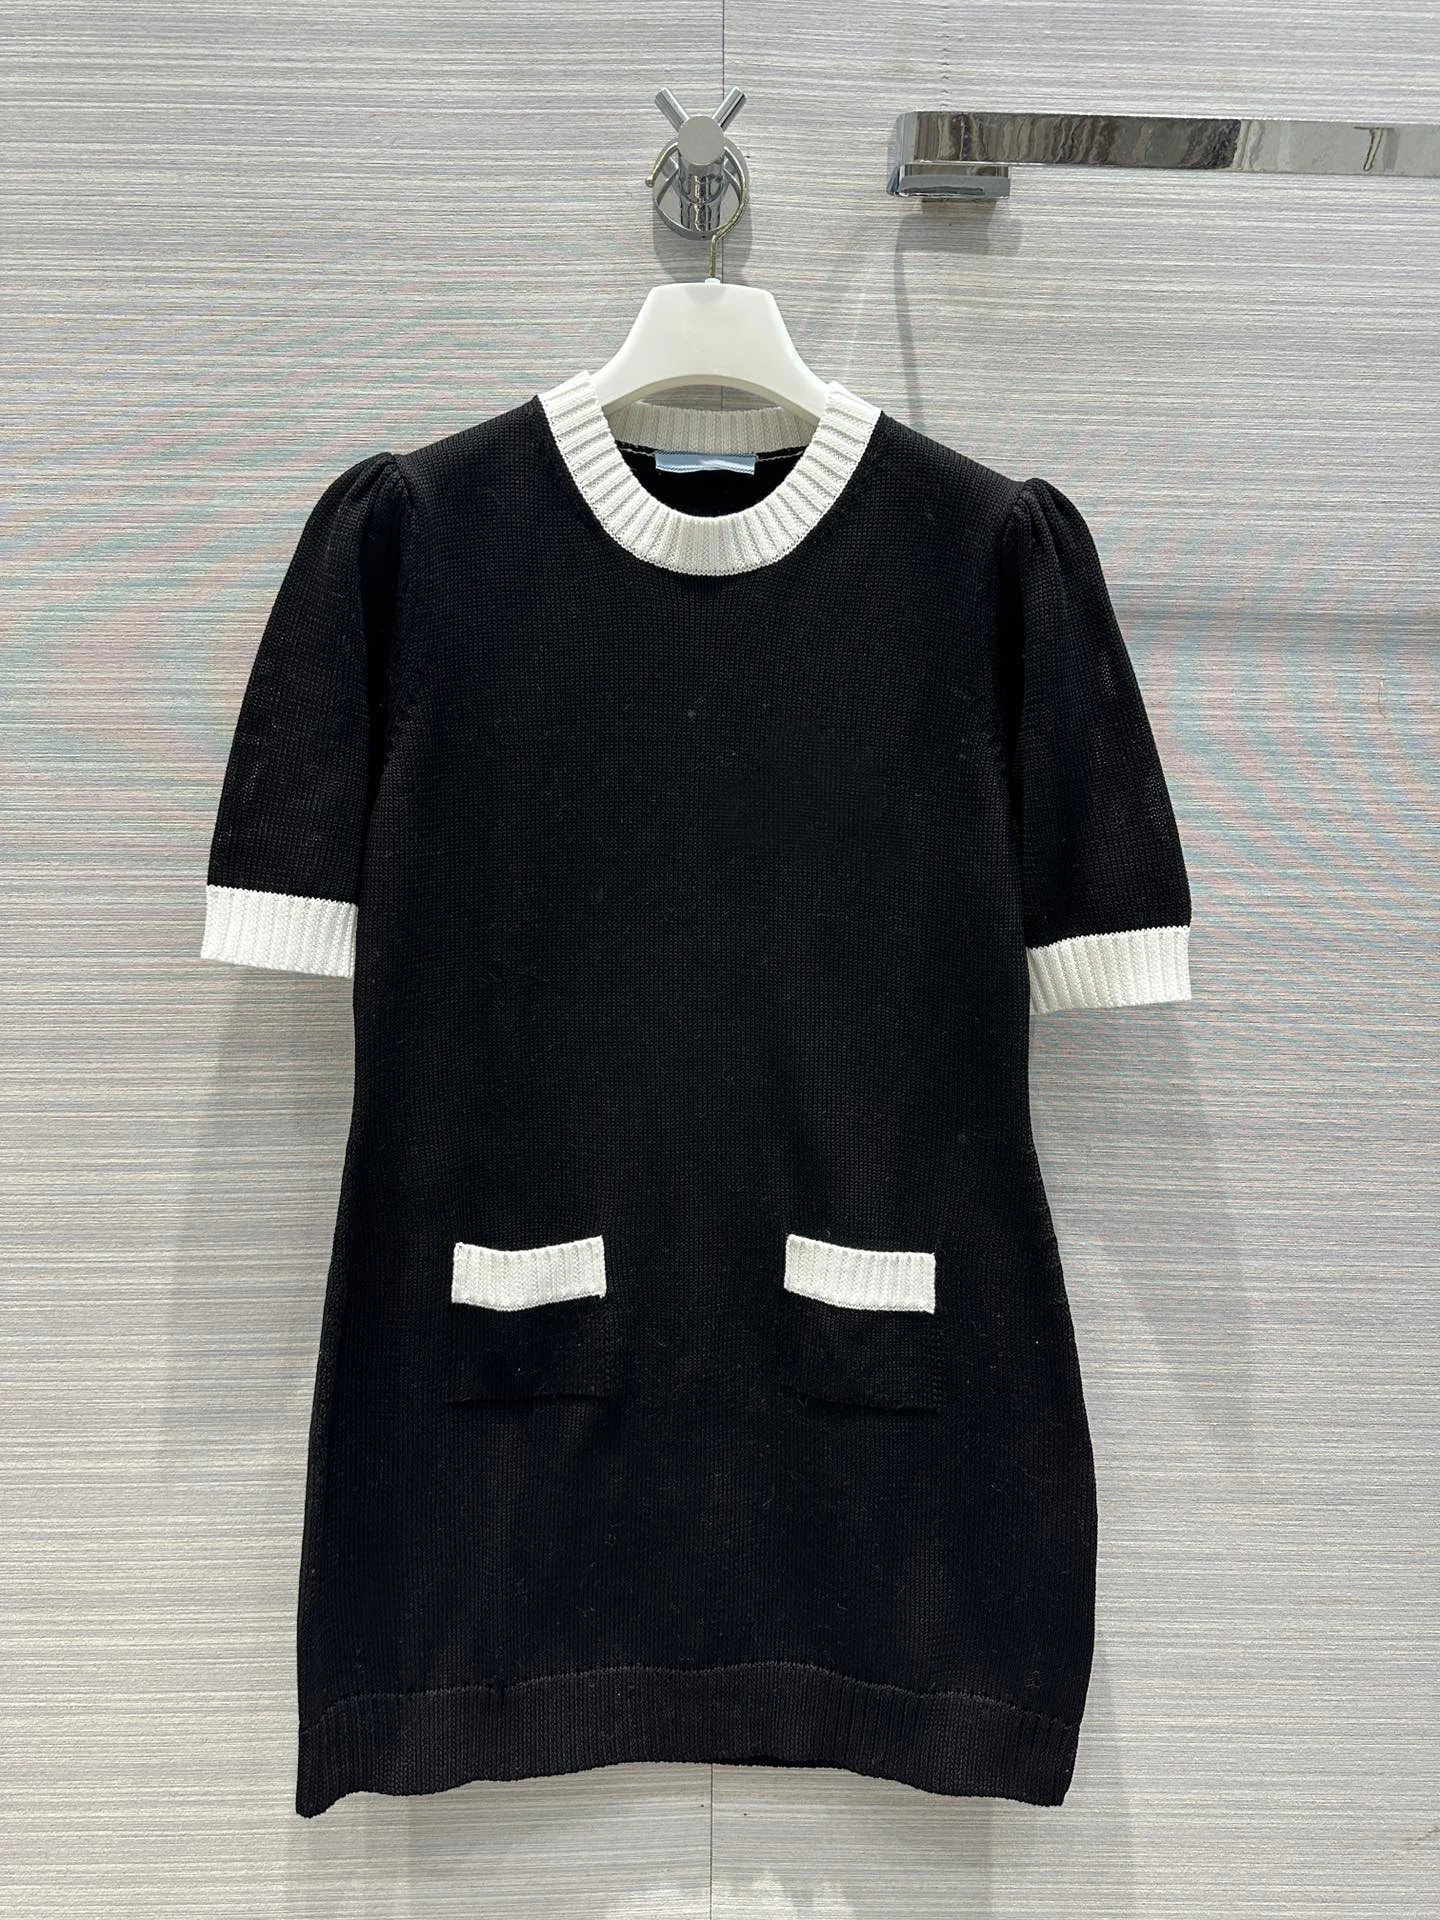 

23 early spring new products senior black and white color knitted dress classic version type does not pick people